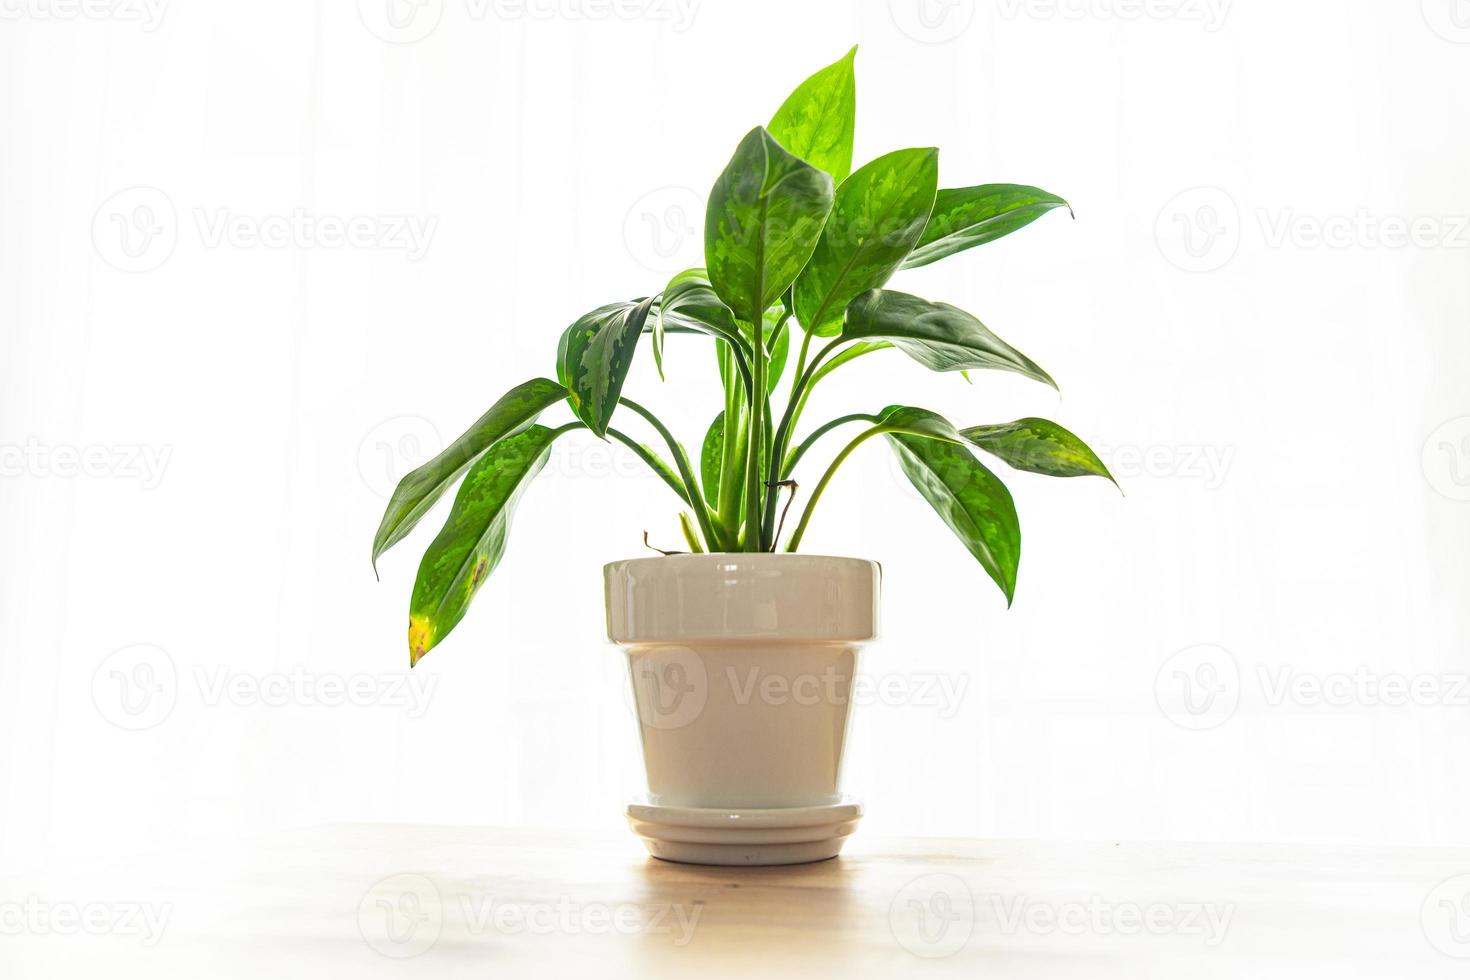 dieffenbachia indoor plant big green leaves evergreen indoor flower in a flower pot on the table copy space photo